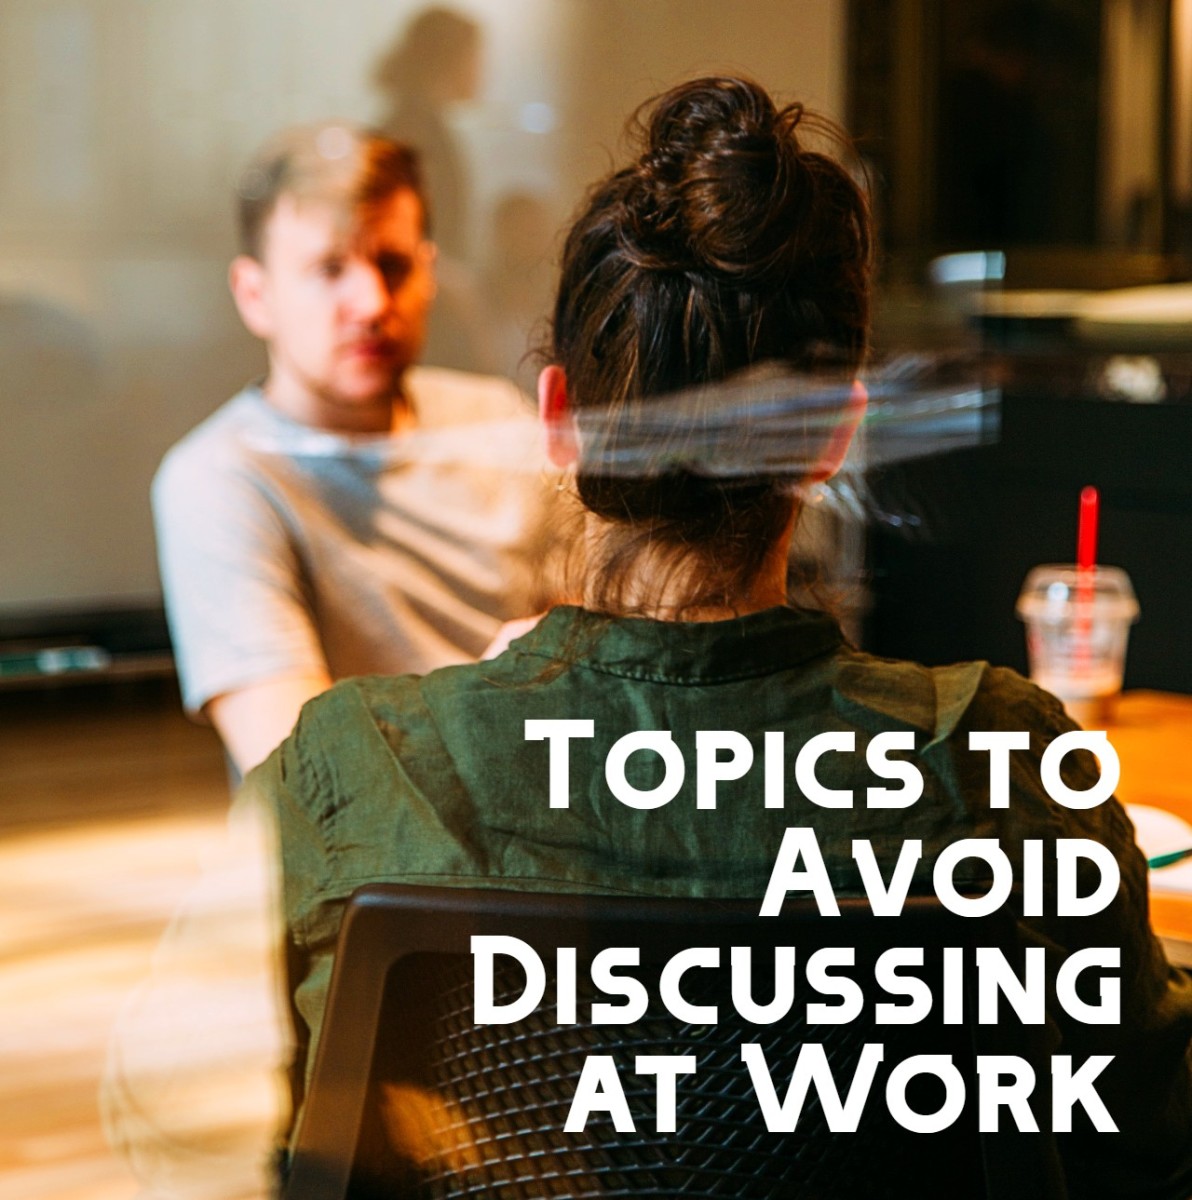 Topics to Avoid Discussing at Work